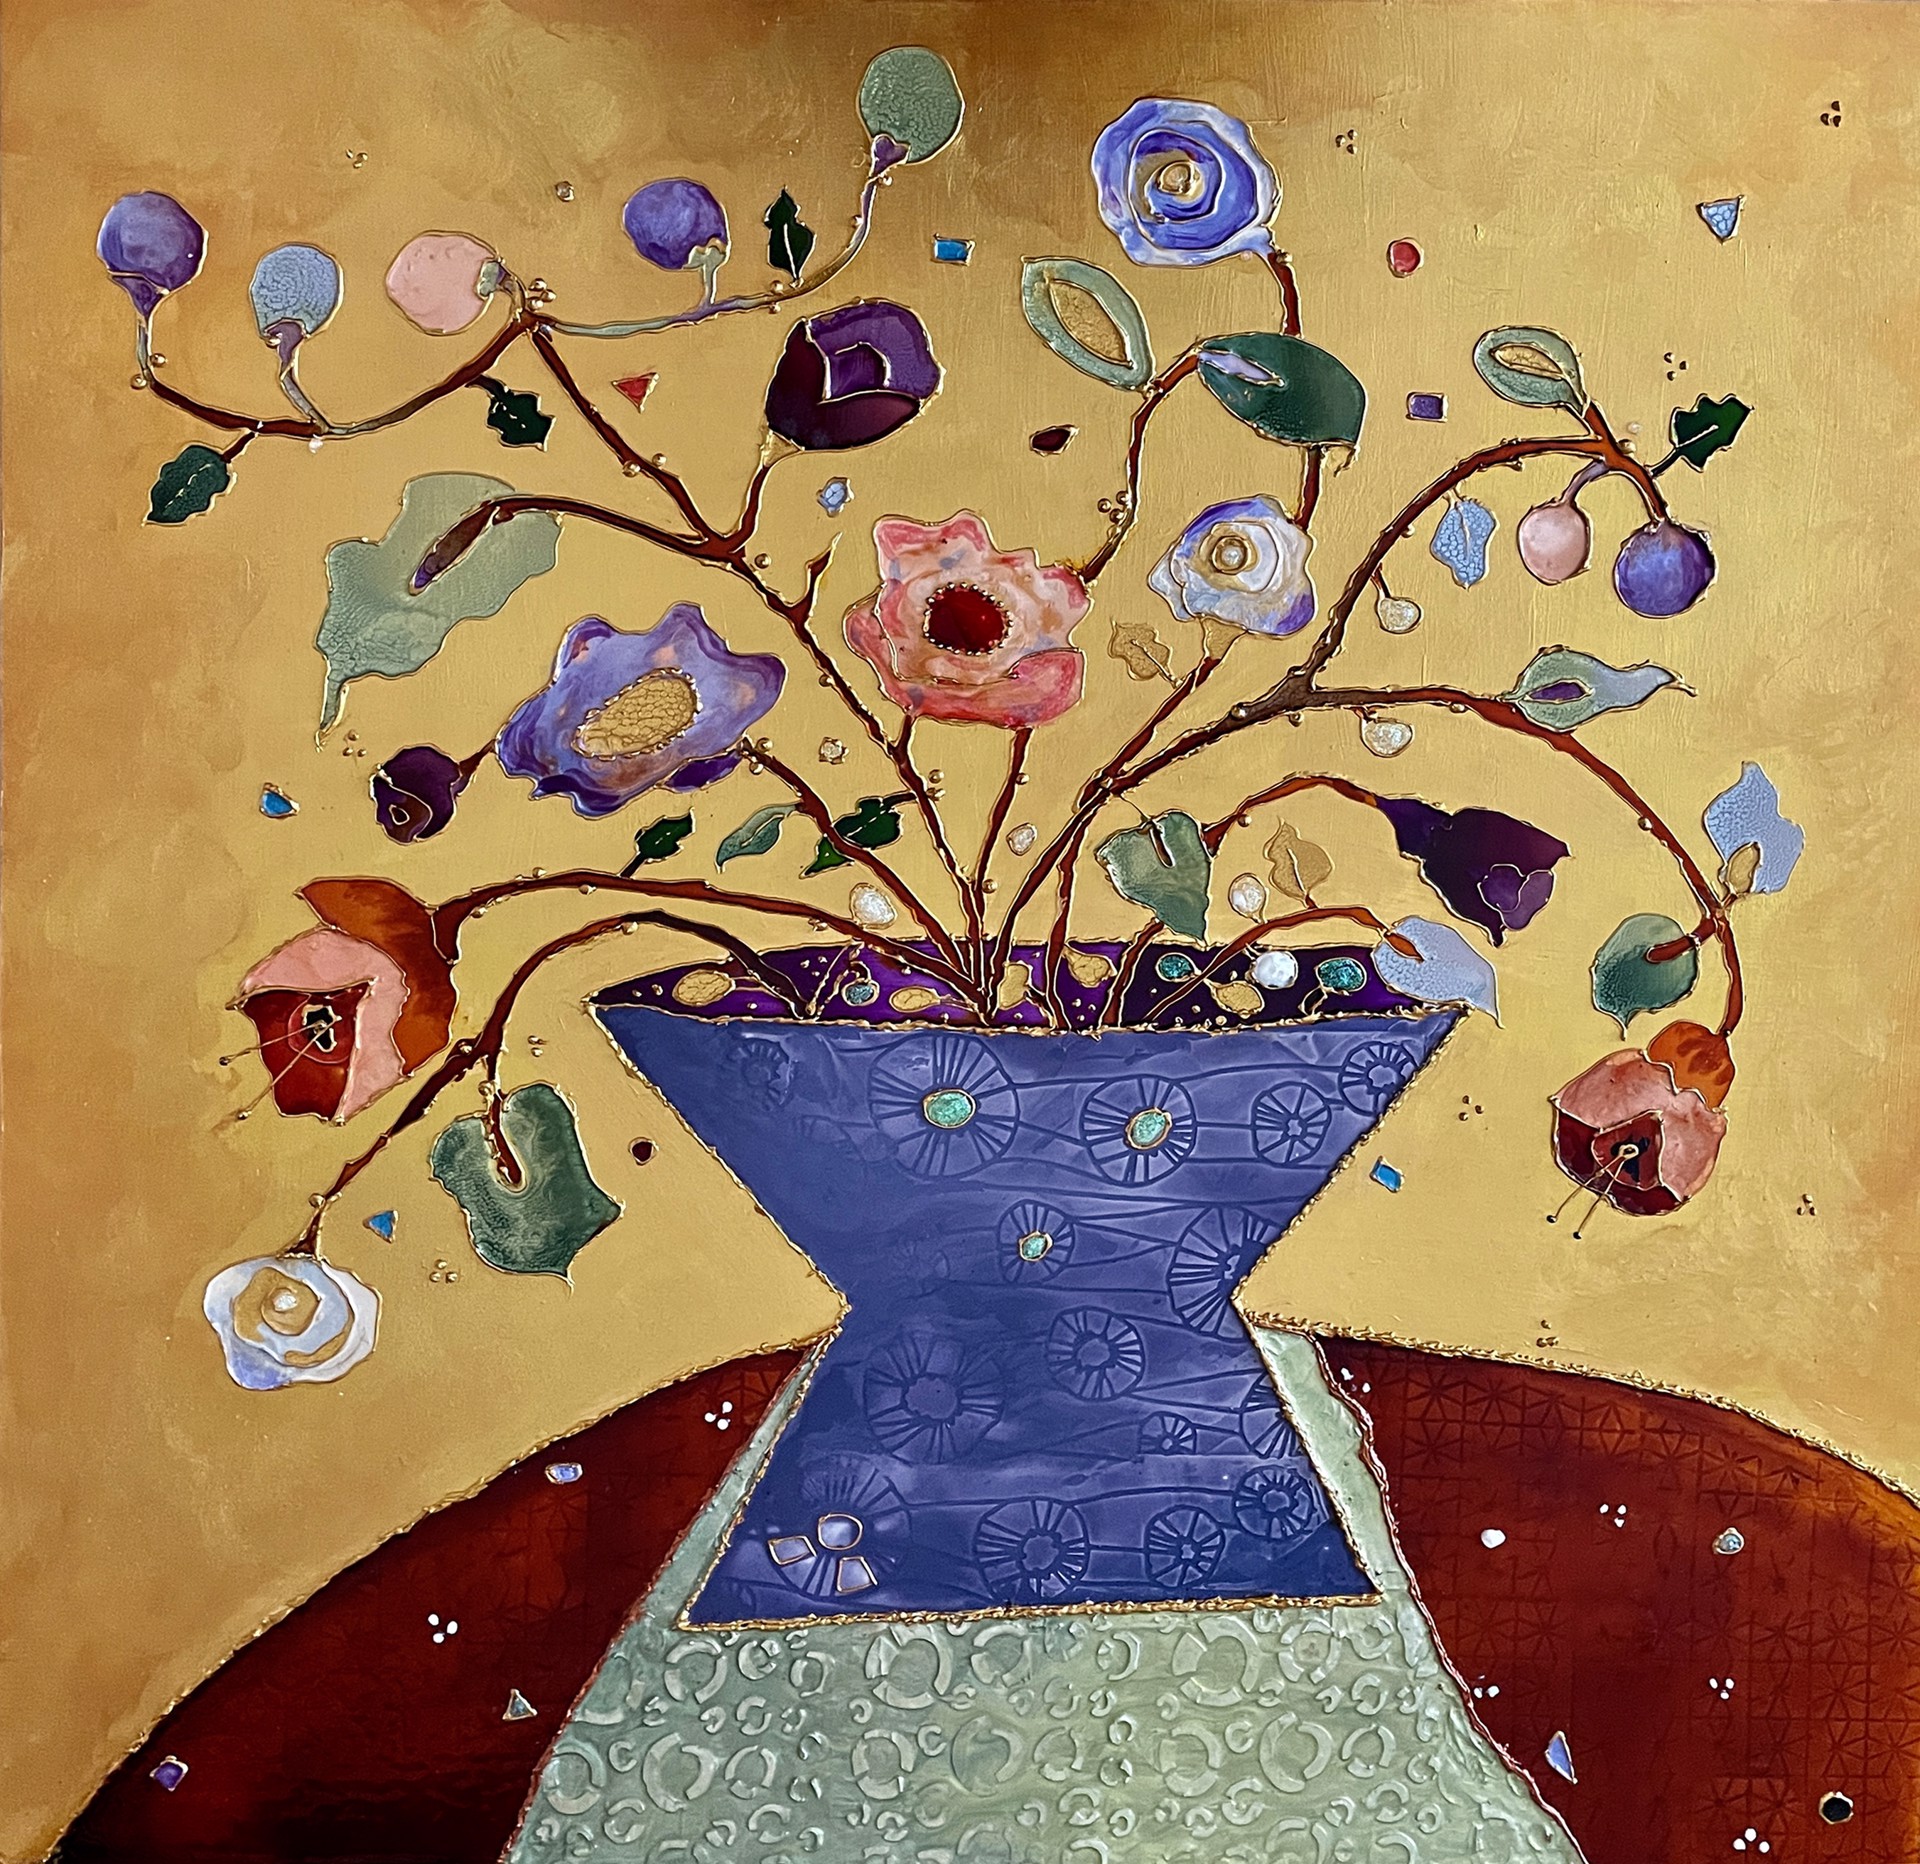 Mixed media on panel floral still life painting Surrounded in Gold III by Genie Appel-Cohen